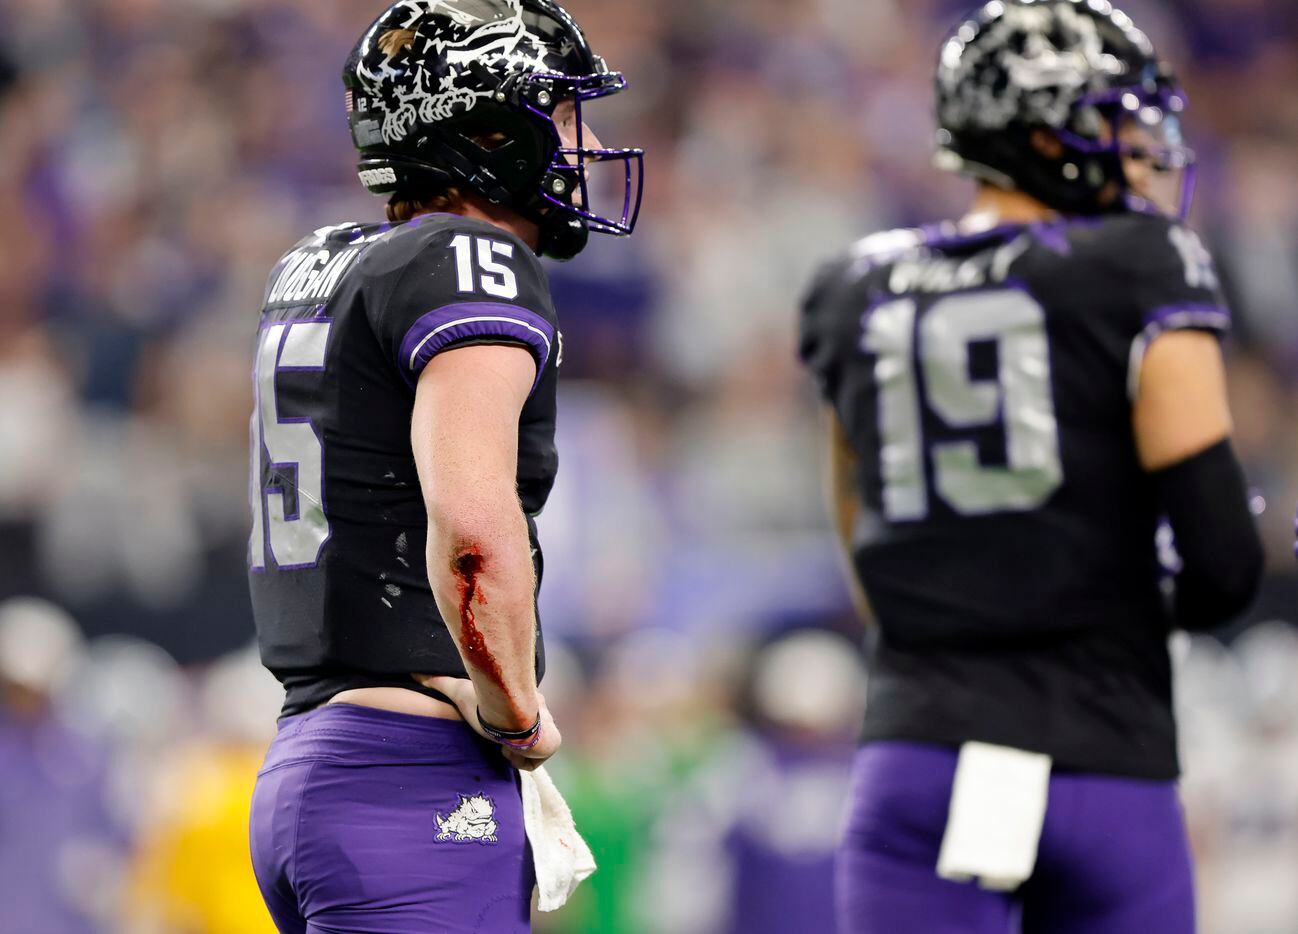 TCU Horned Frogs quarterback Max Duggan (15) was slow to get up partially due to his...